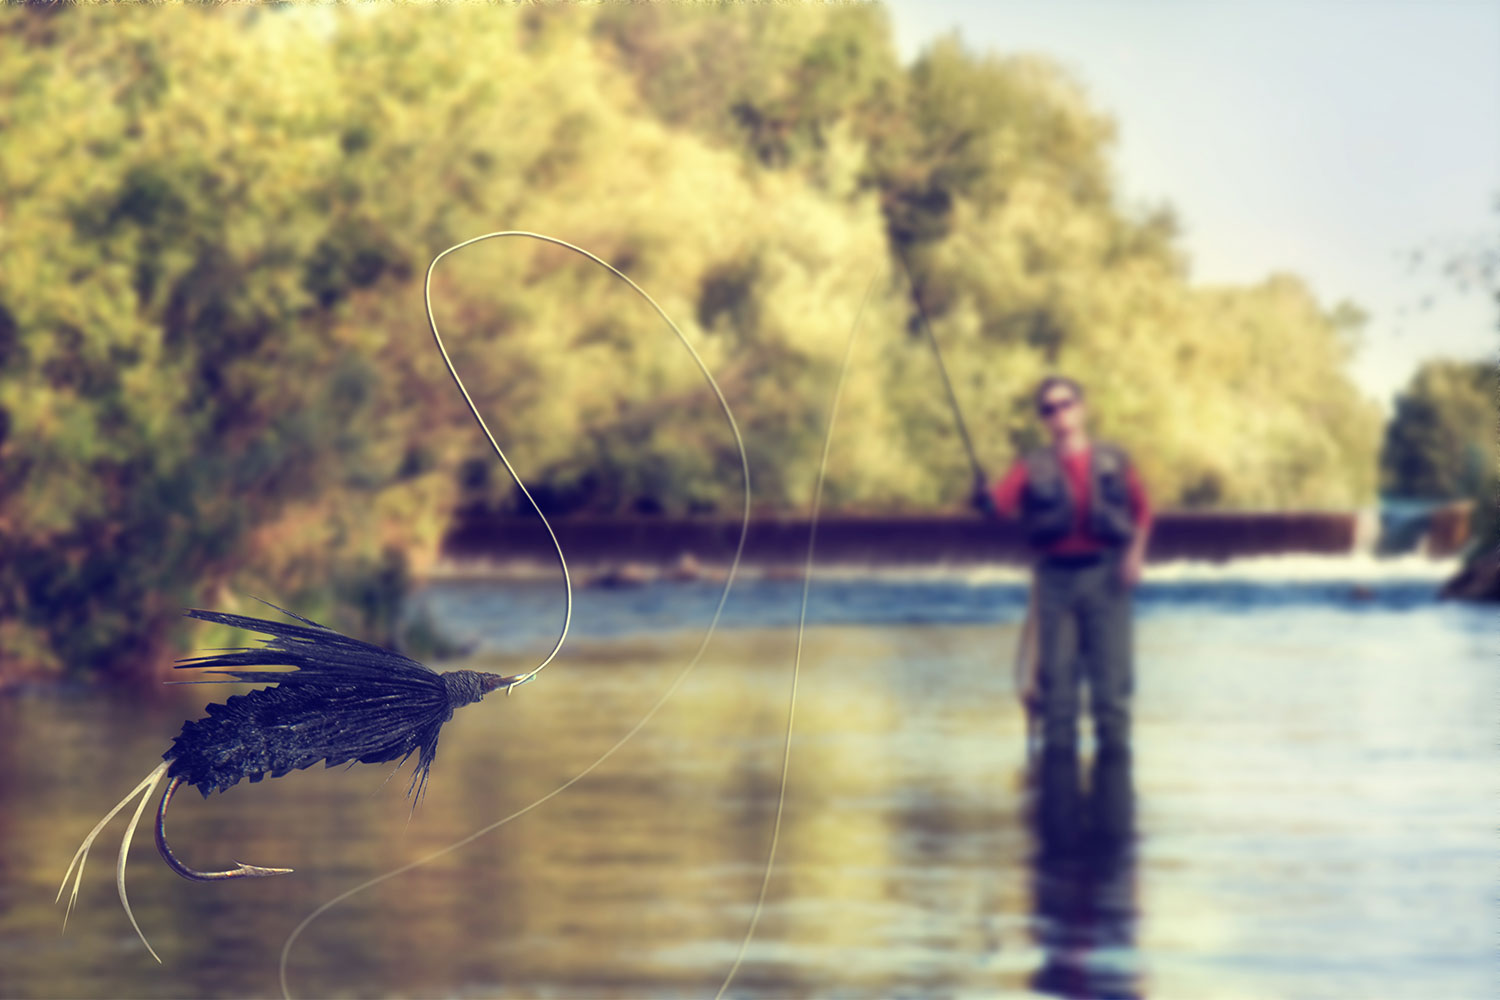 https://www.themanual.com/wp-content/uploads/sites/9/2020/06/fly-fishing-1.jpg?fit=800%2C533&p=1